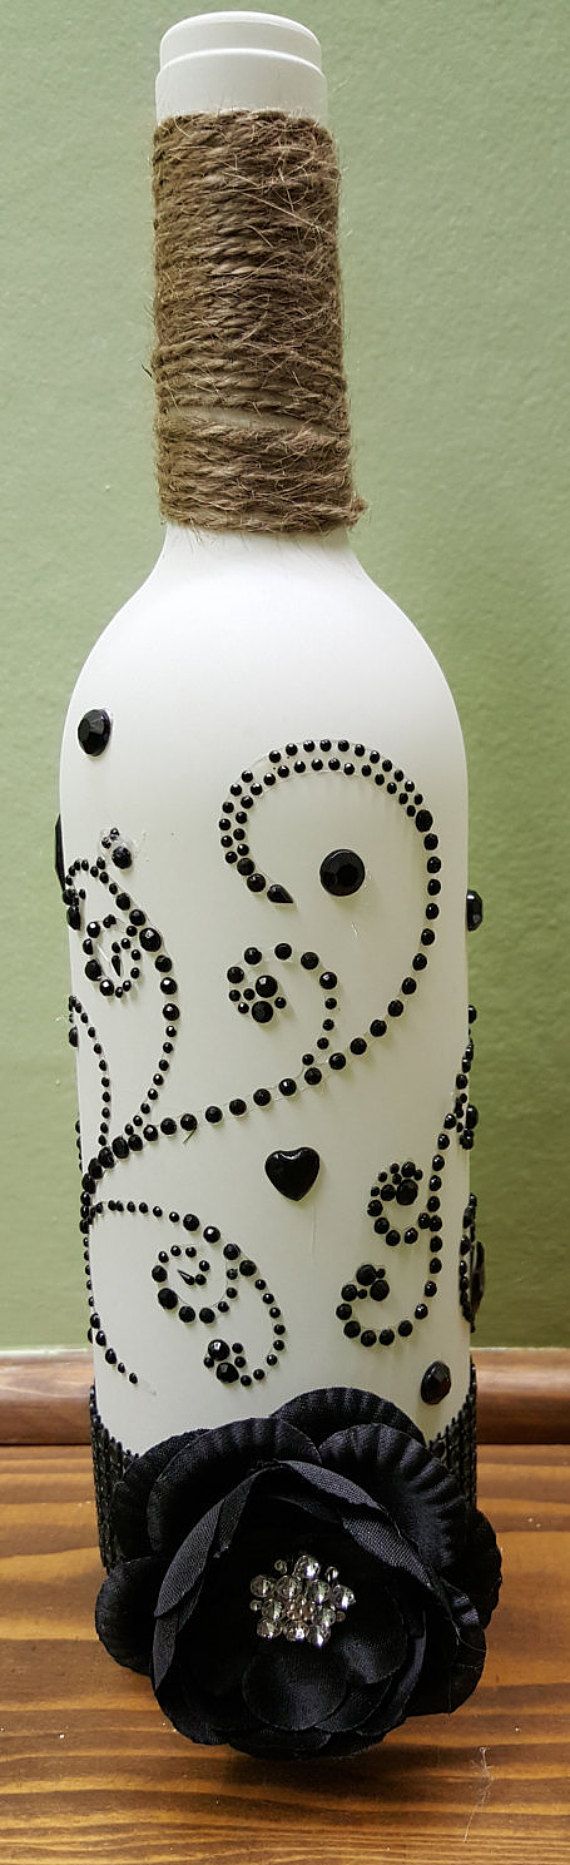 White Decorated Bottle by Craftswithglassnmore on Etsy